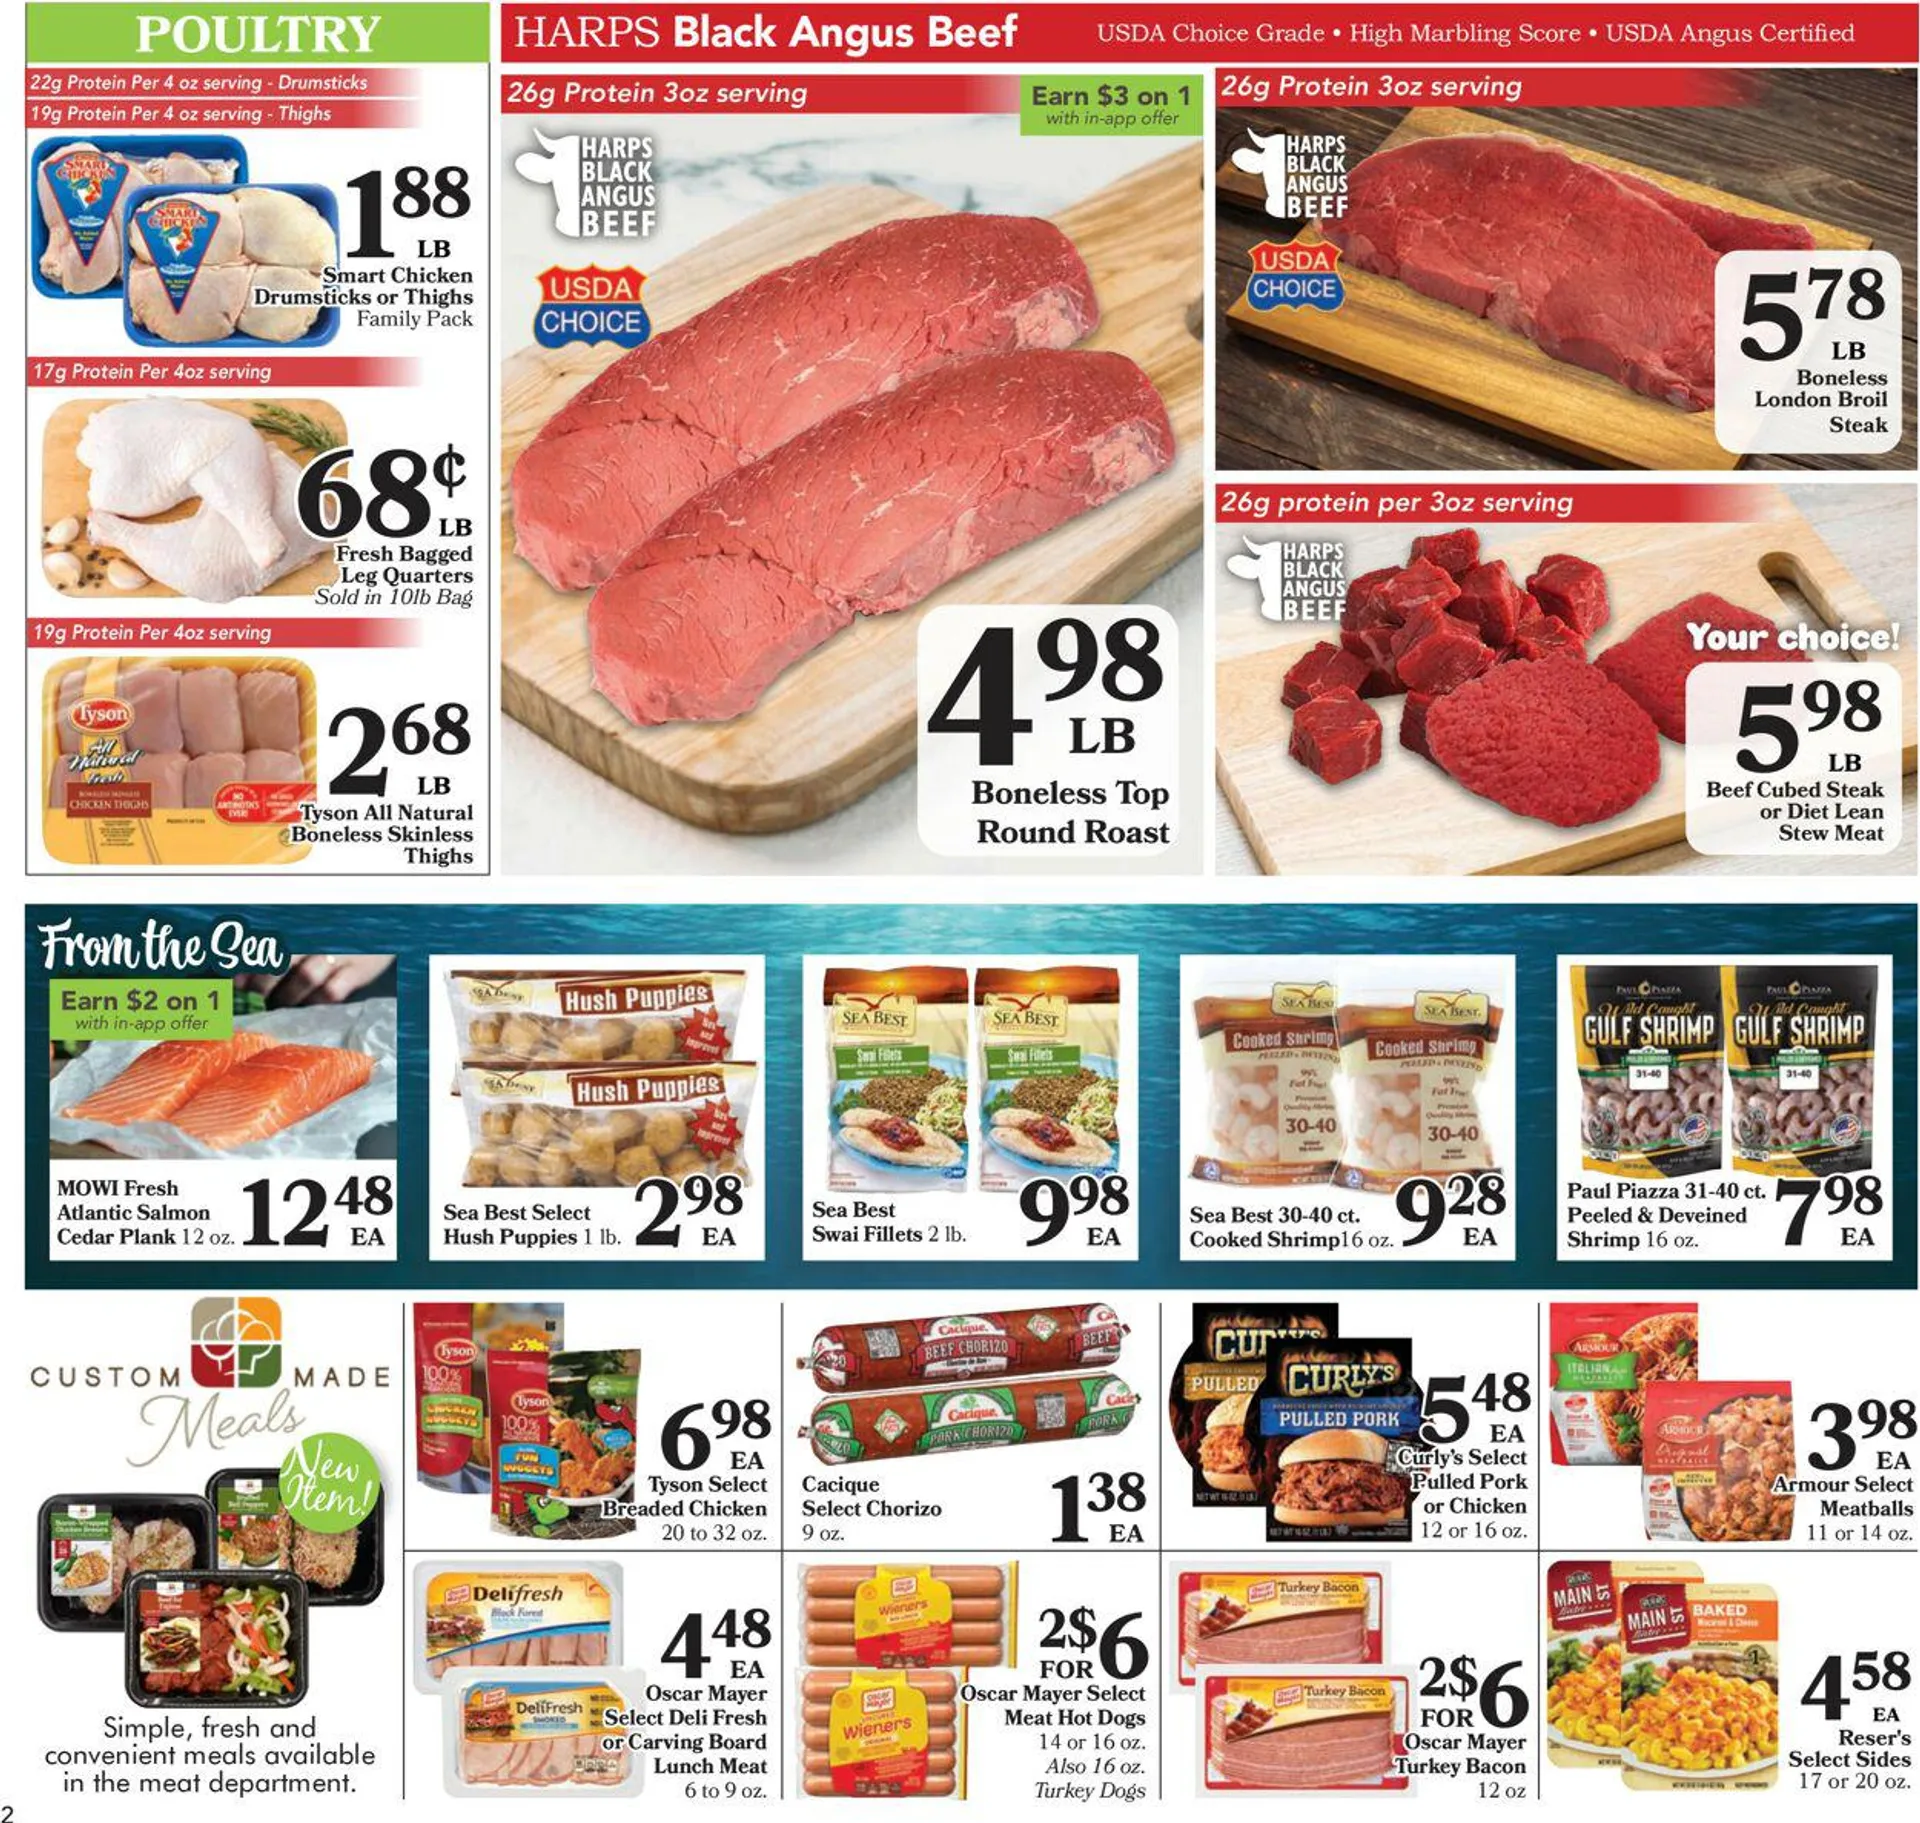 Harps Foods Current weekly ad - 2